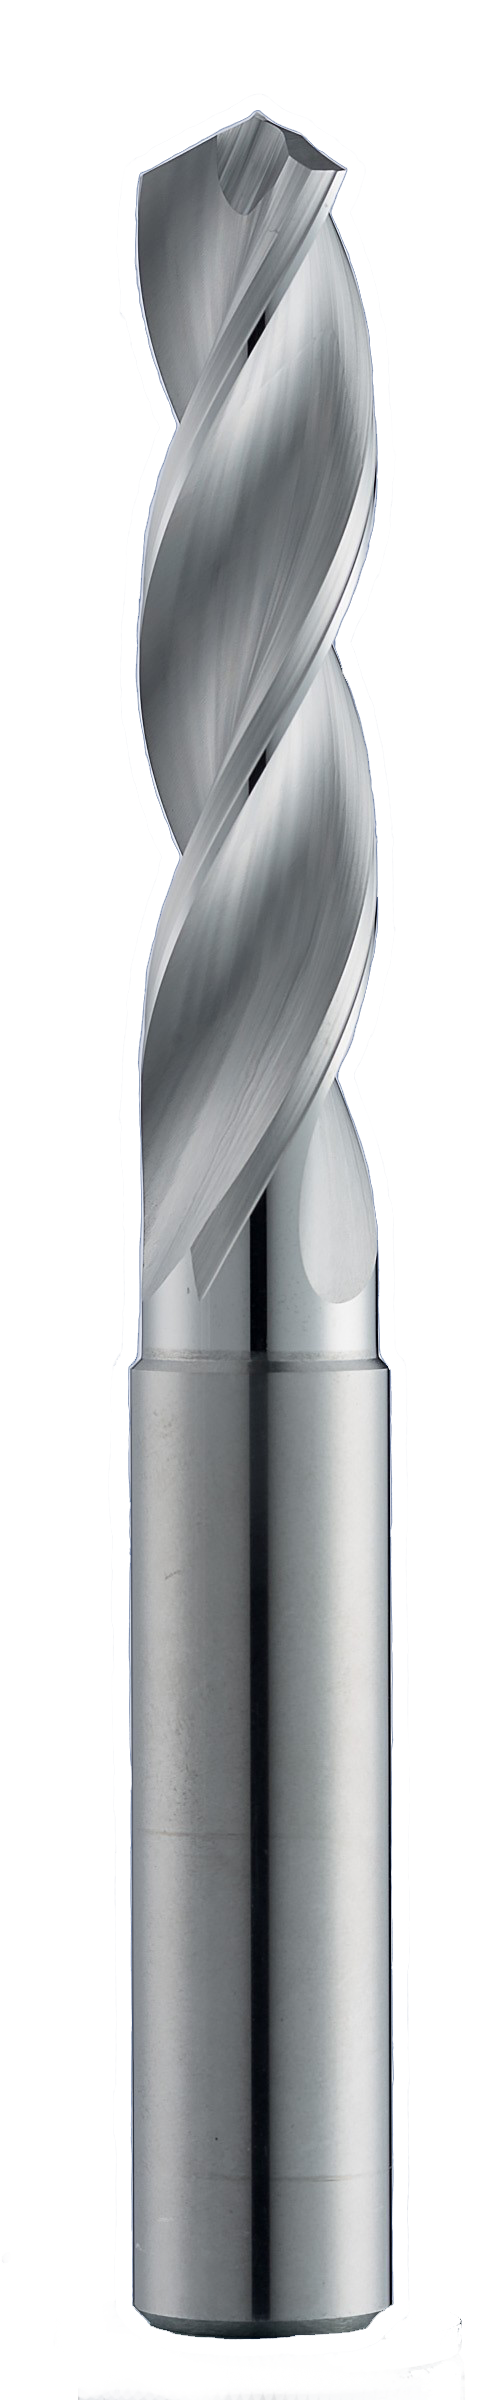 6.70mm Dia, 124 Degree Point, Solid Carbide Drill - 64637